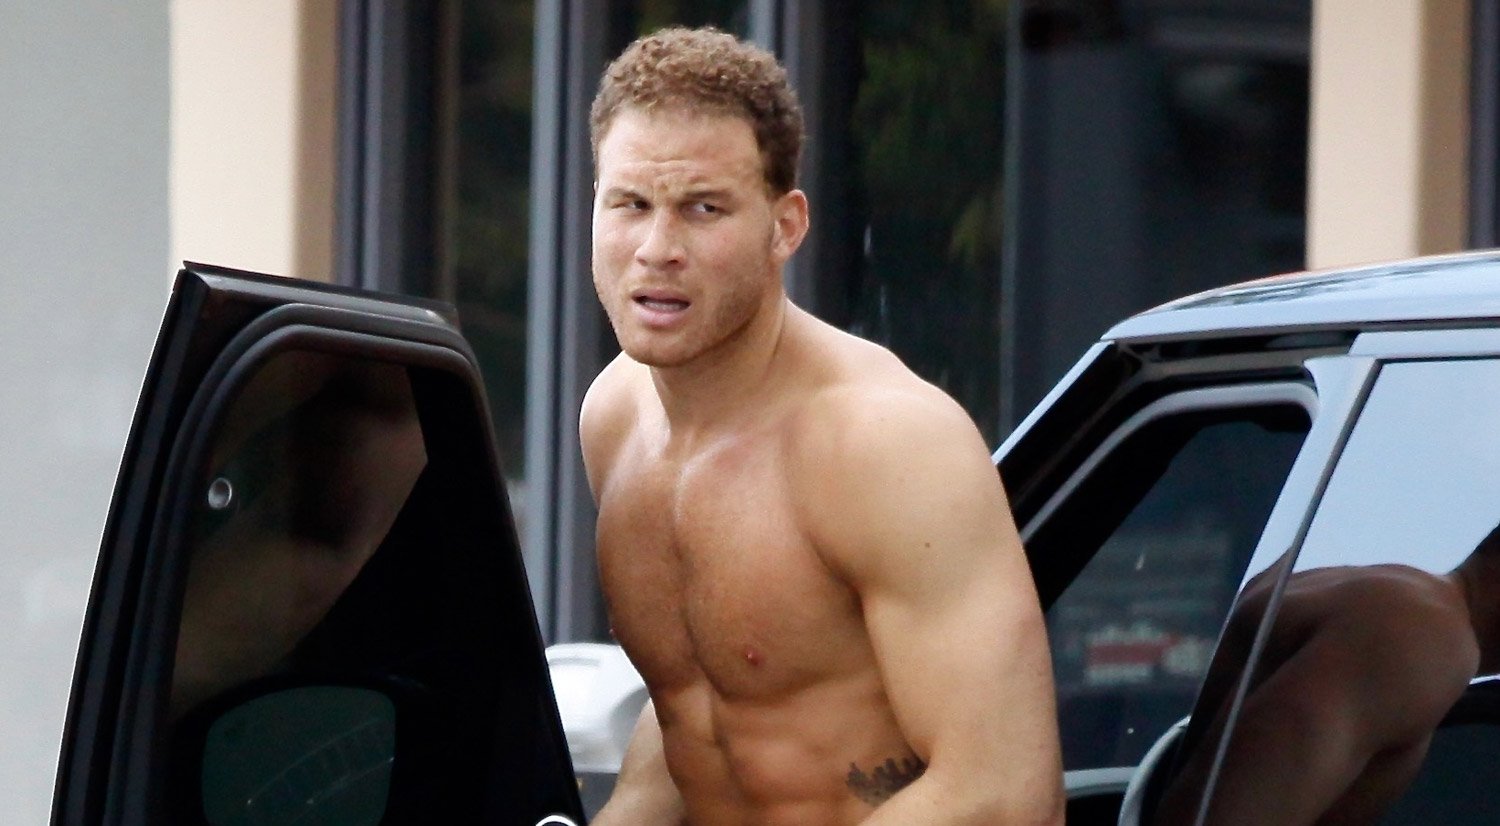 Blake Griffin Goes Shirtless While Stepping Out for a Juice Run.